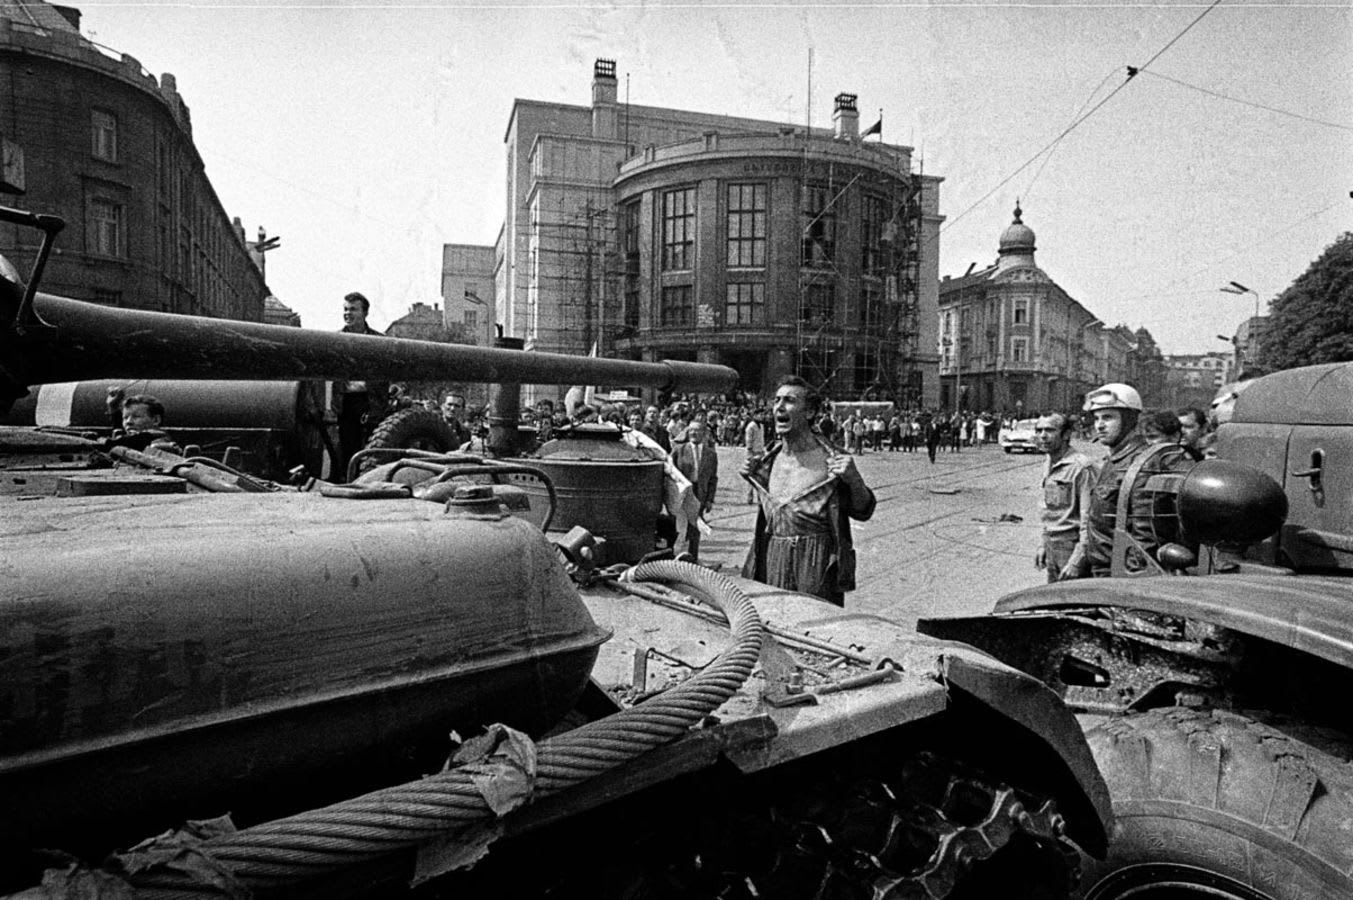 "The bare-chested man in front of the occupiers tank" by Ladislav Bielik. The photo was taken in Bratislava during the Warsaw Pact invasion of Czechoslovakia in August 1968